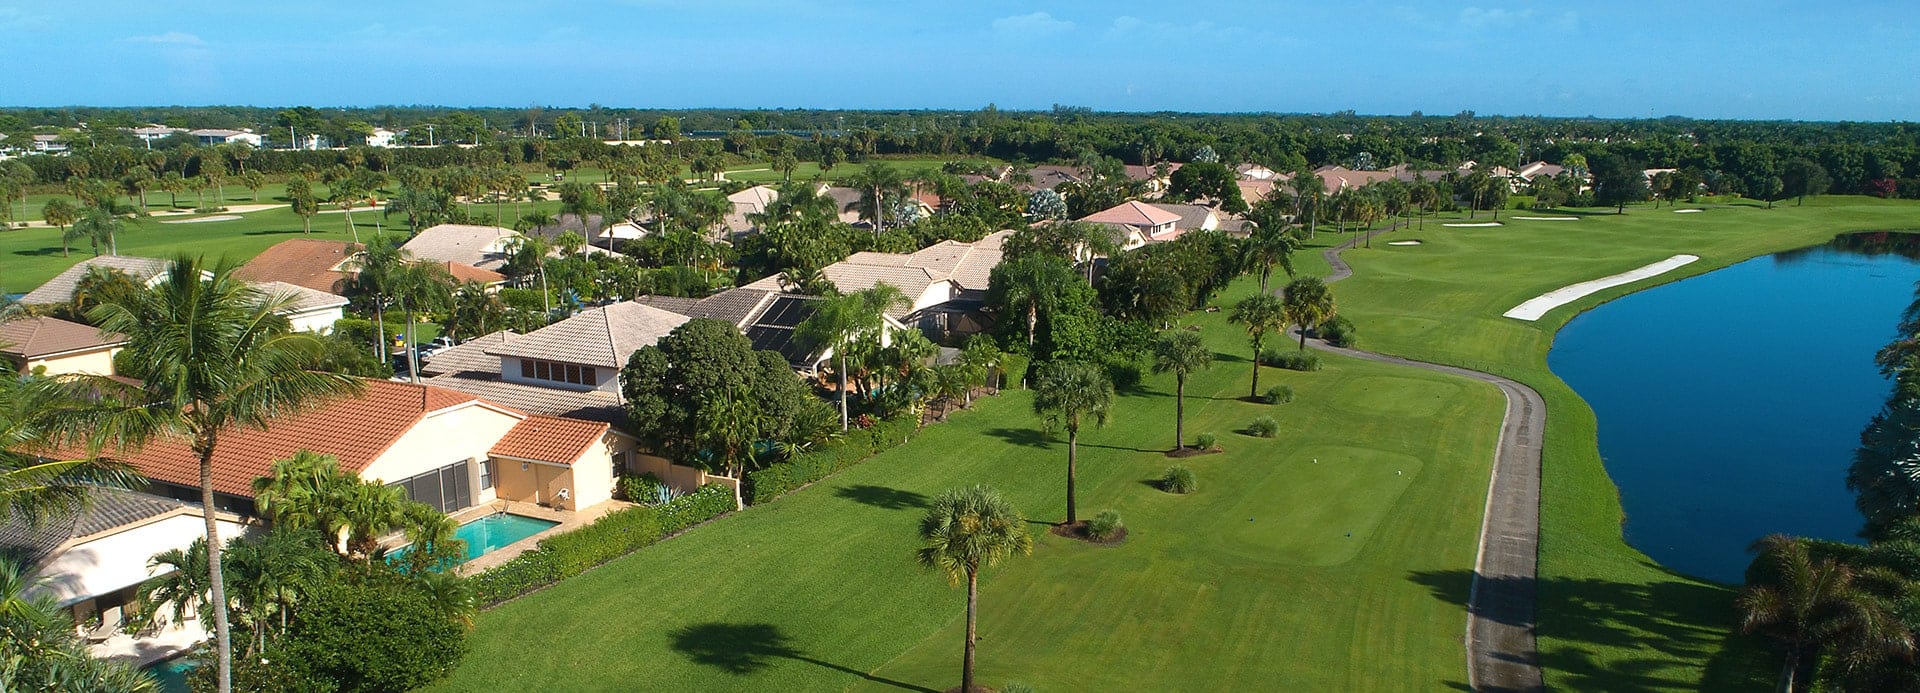 Overview of a Boca West Golf Course